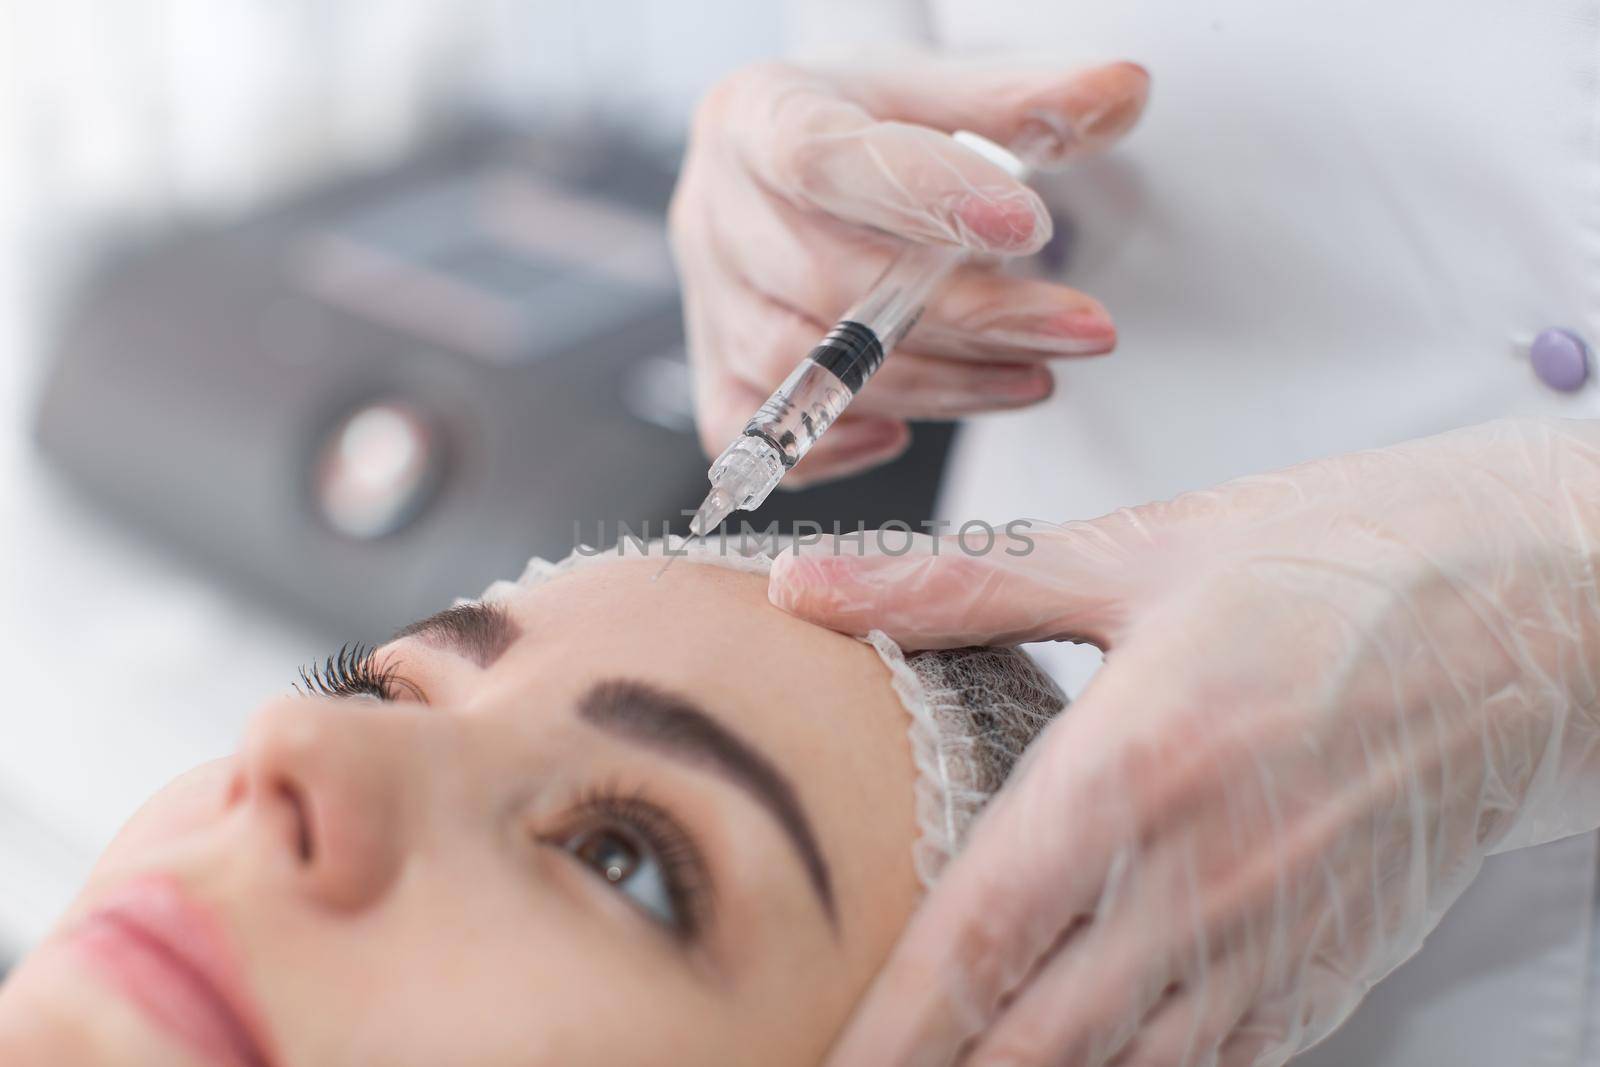 Woman gets injection in her face. Beauty woman giving botox injections. Young woman gets beauty facial injections in the cosmetology salon. Face aging injection. Aesthetic Medicine, Cosmetology